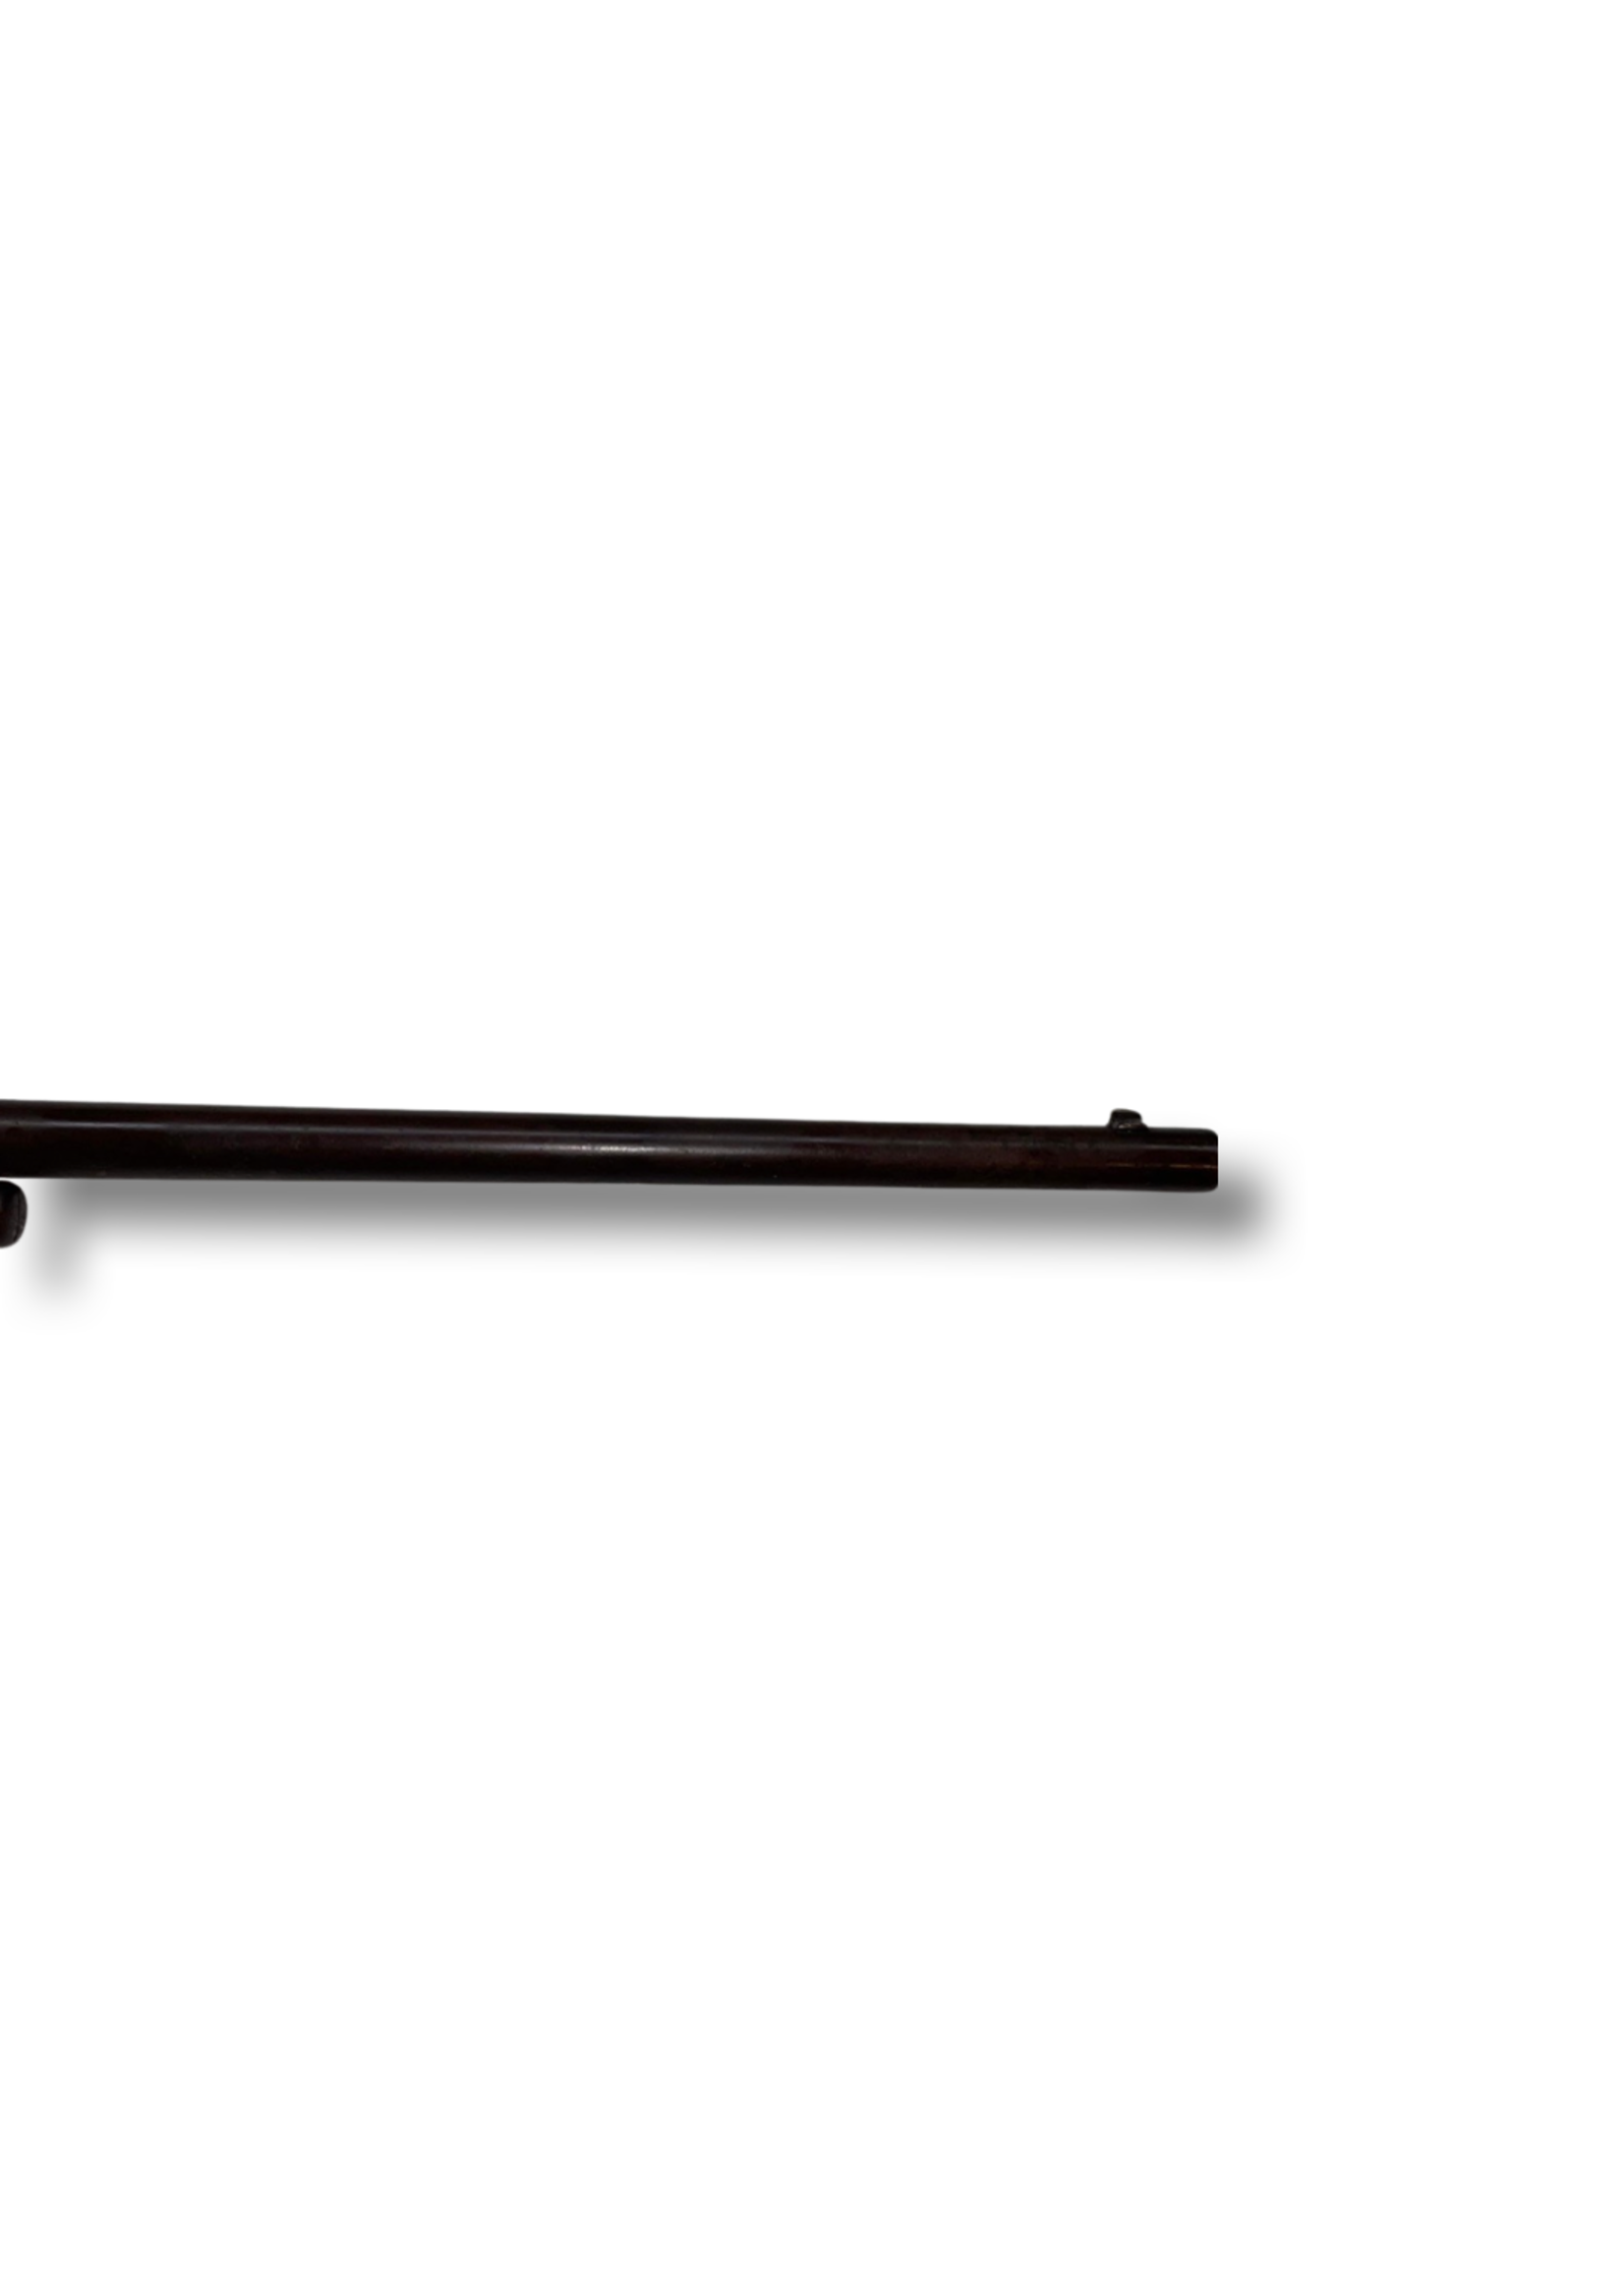 WINCHESTER USED WINCHESTER 45/70 MODEL 1886 VINTAGE BORN 1904 26” BRL/ FRONT & REAR SIGHTS/ 1/2 MAG/ CHECKED HAMMER CRESCENT BUTT STOCK